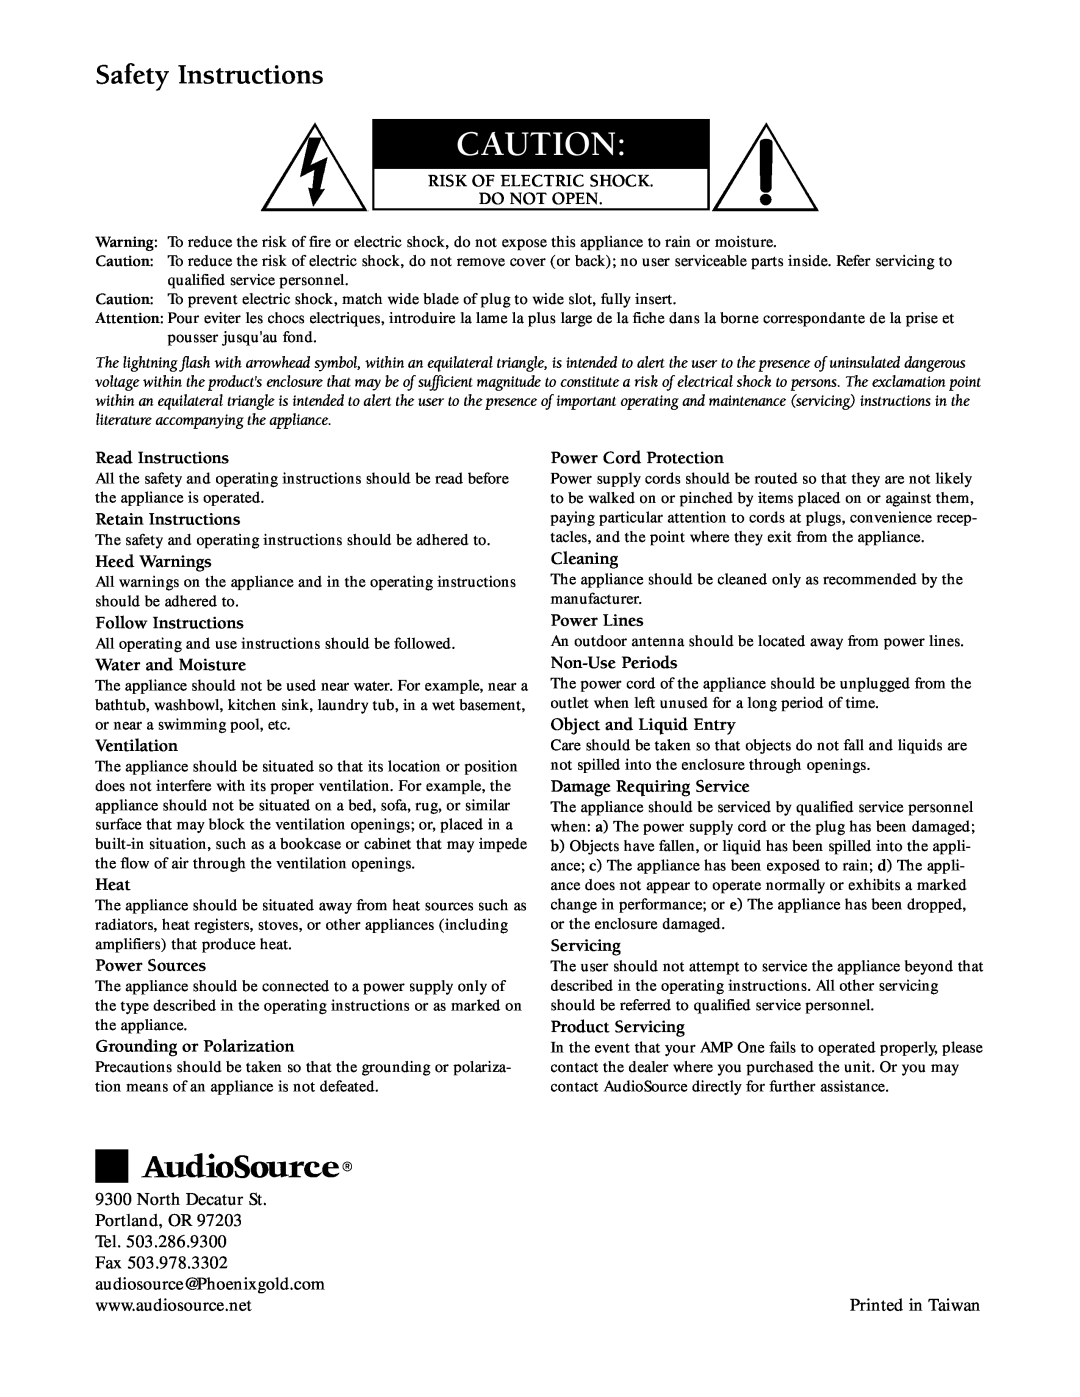 AudioSource PROJECTONE owner manual Safety Instructions 